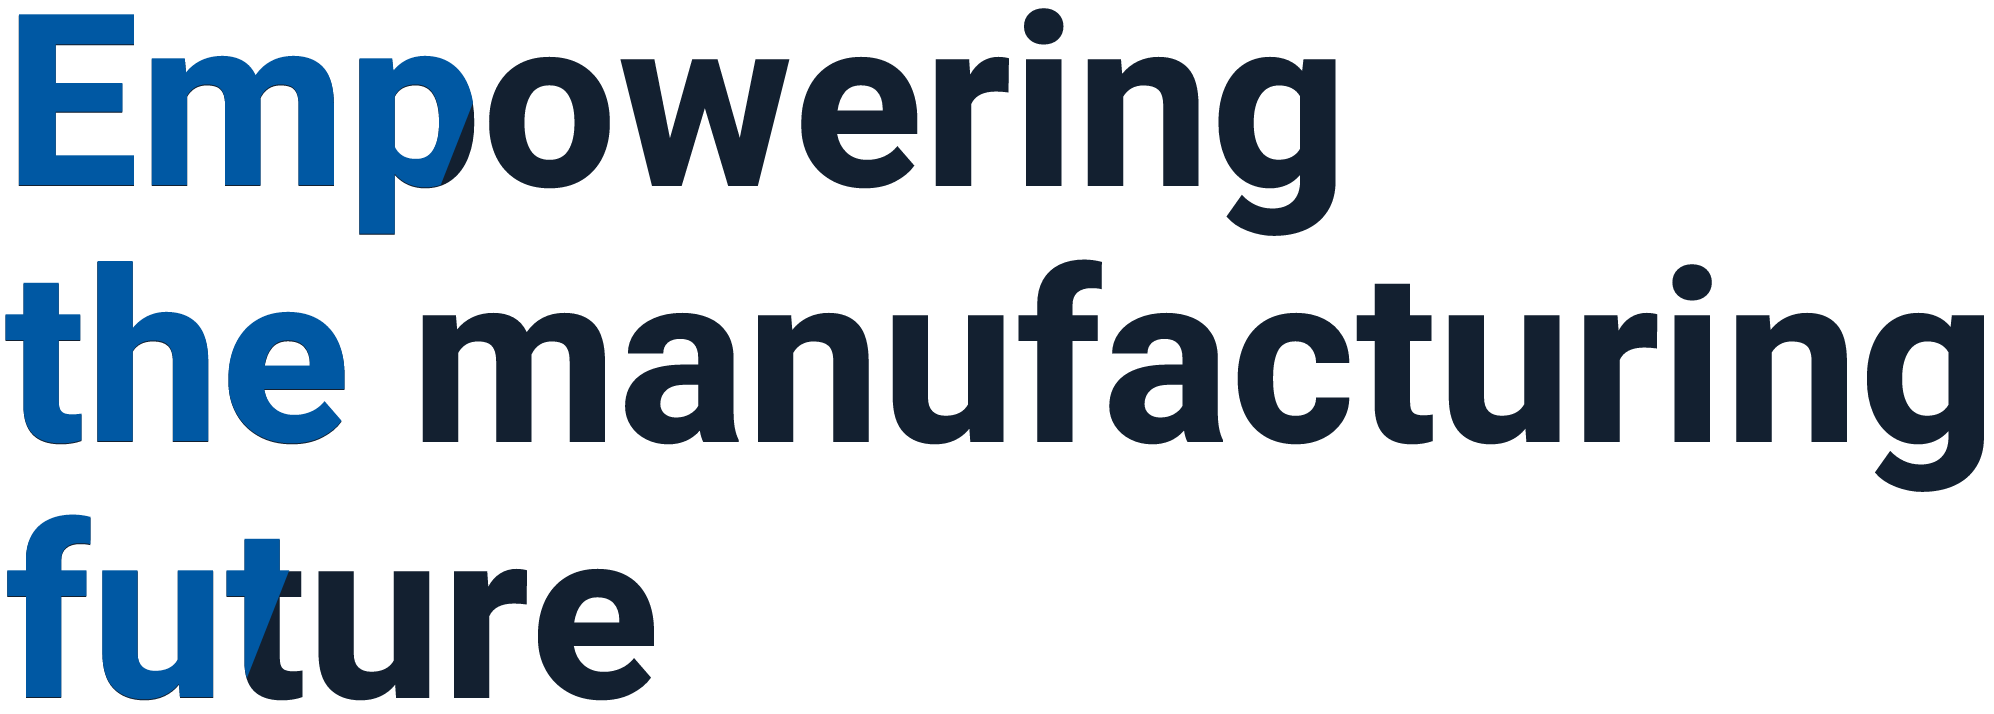 Empowering the manufacturing future